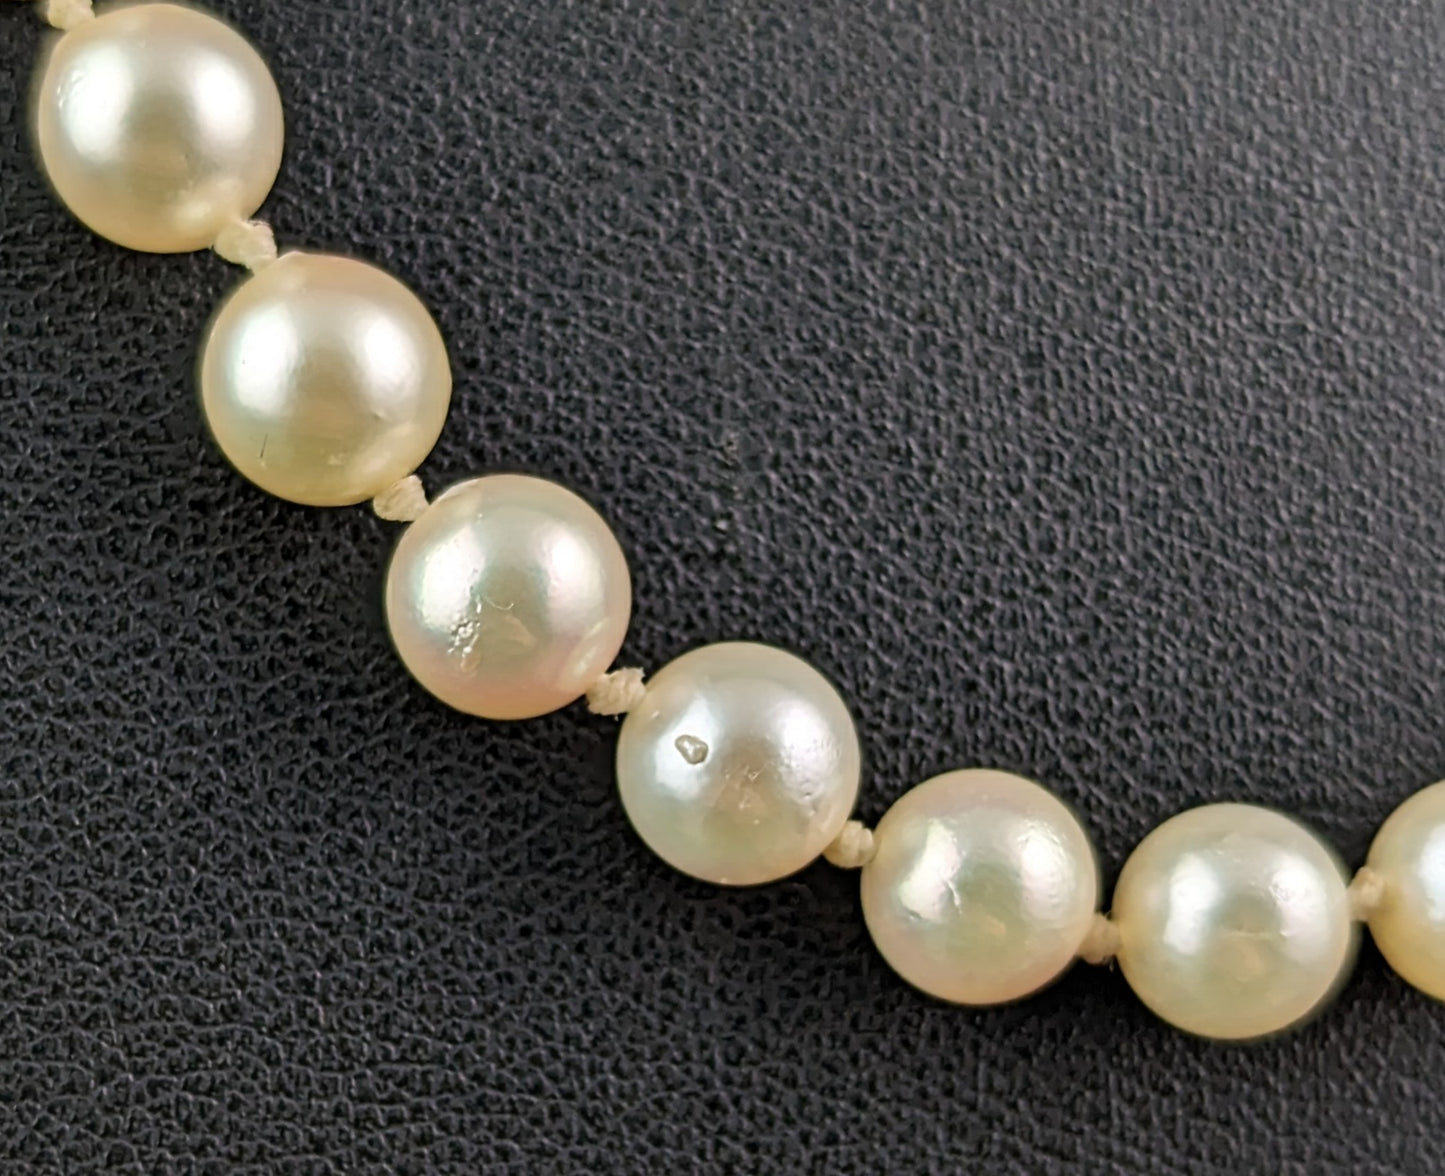 Vintage Cultured Pearl necklace, 9k yellow gold clasp